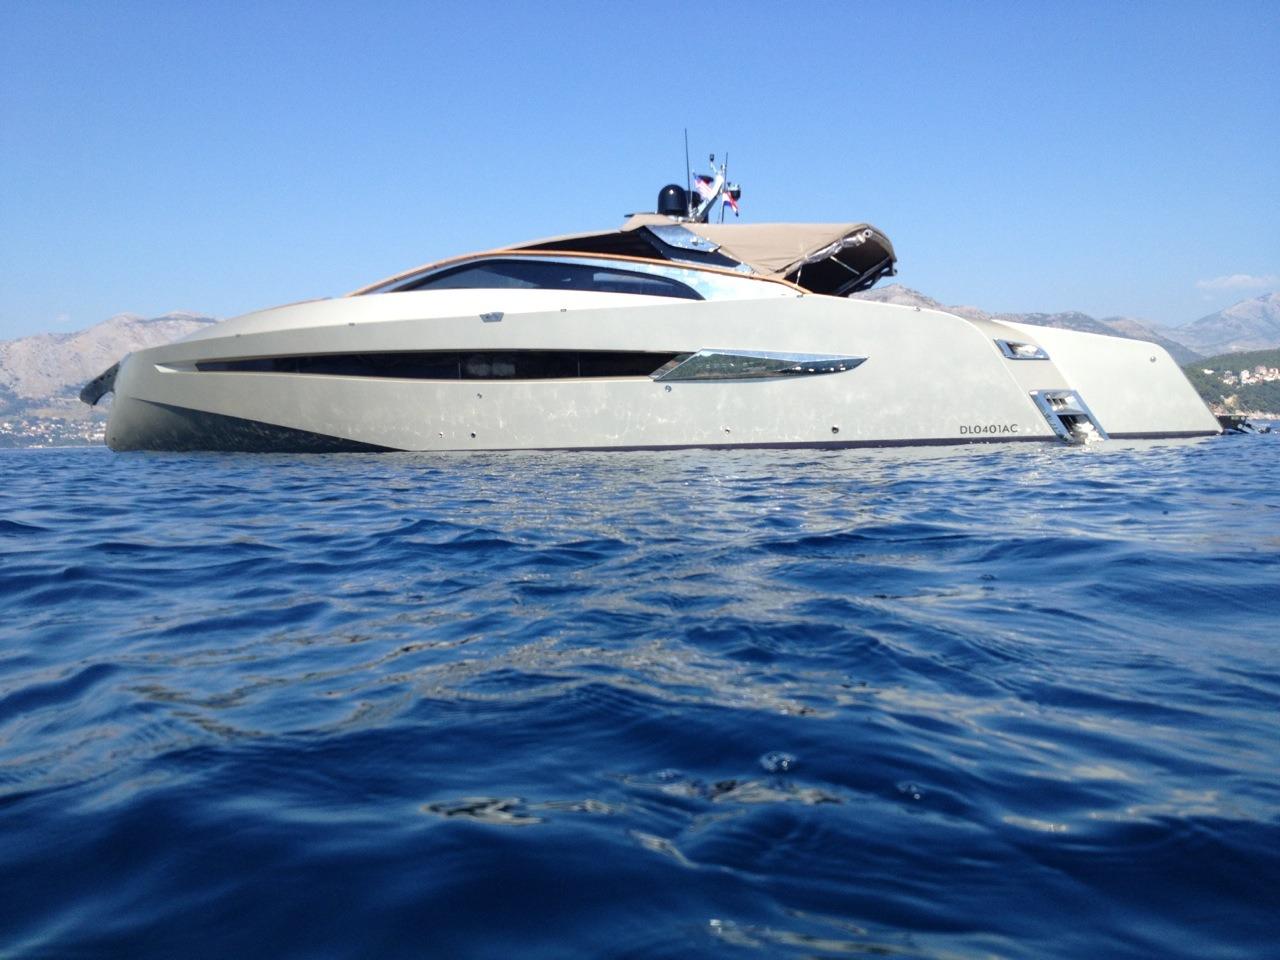 hedonist yacht for sale